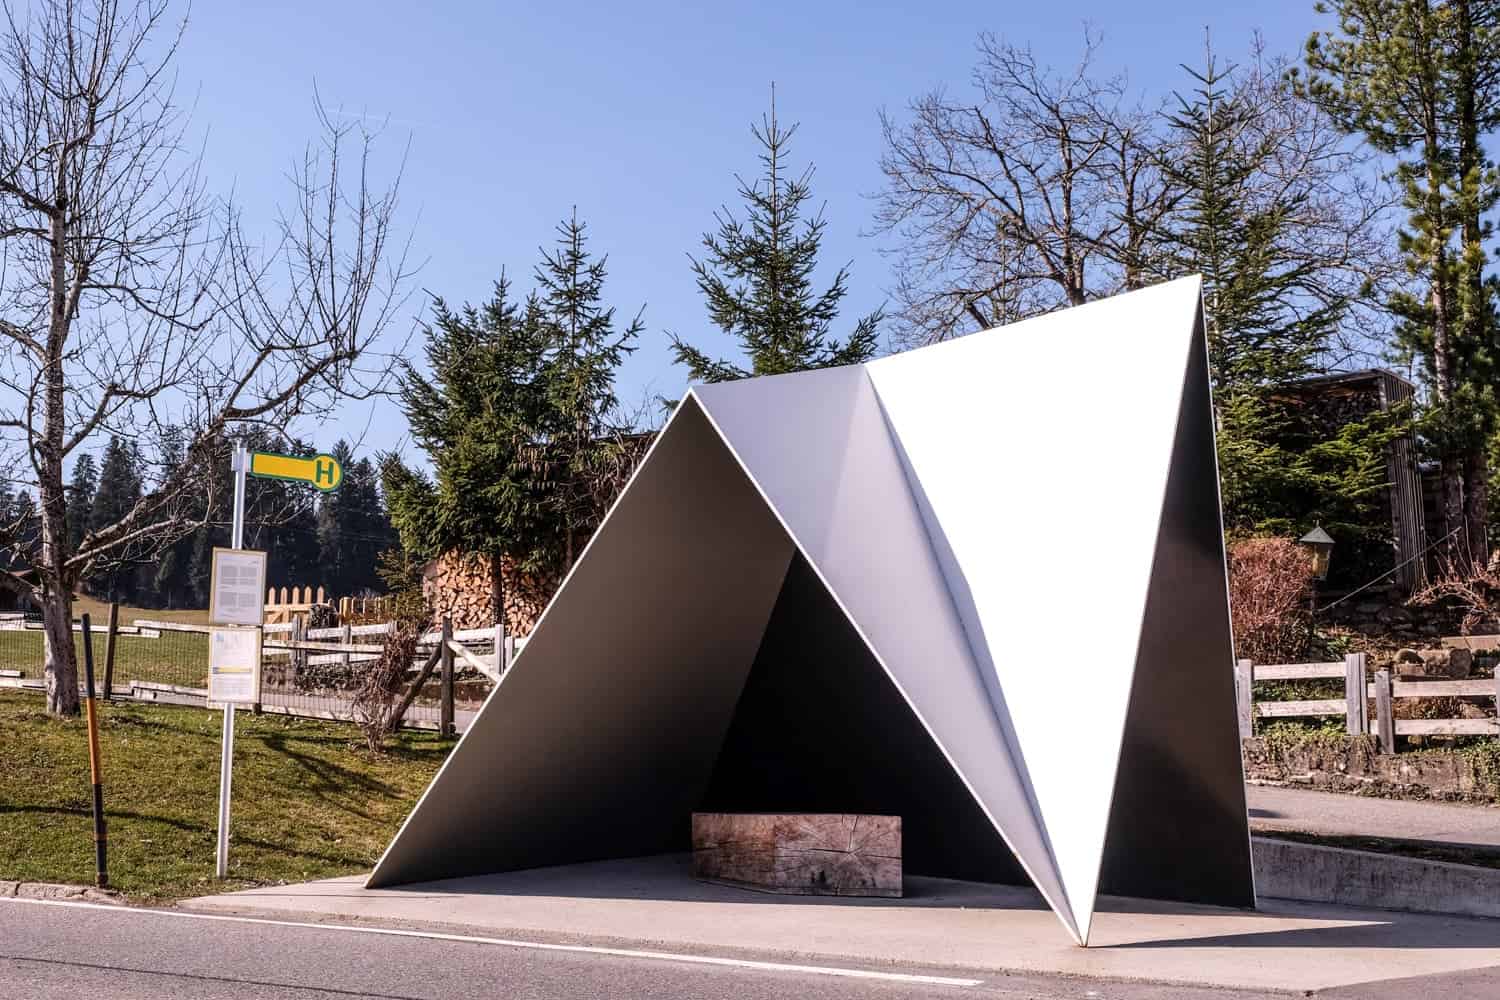 Mountain design at one of the bus stops in Krumbach, Vorarlberg, Austria